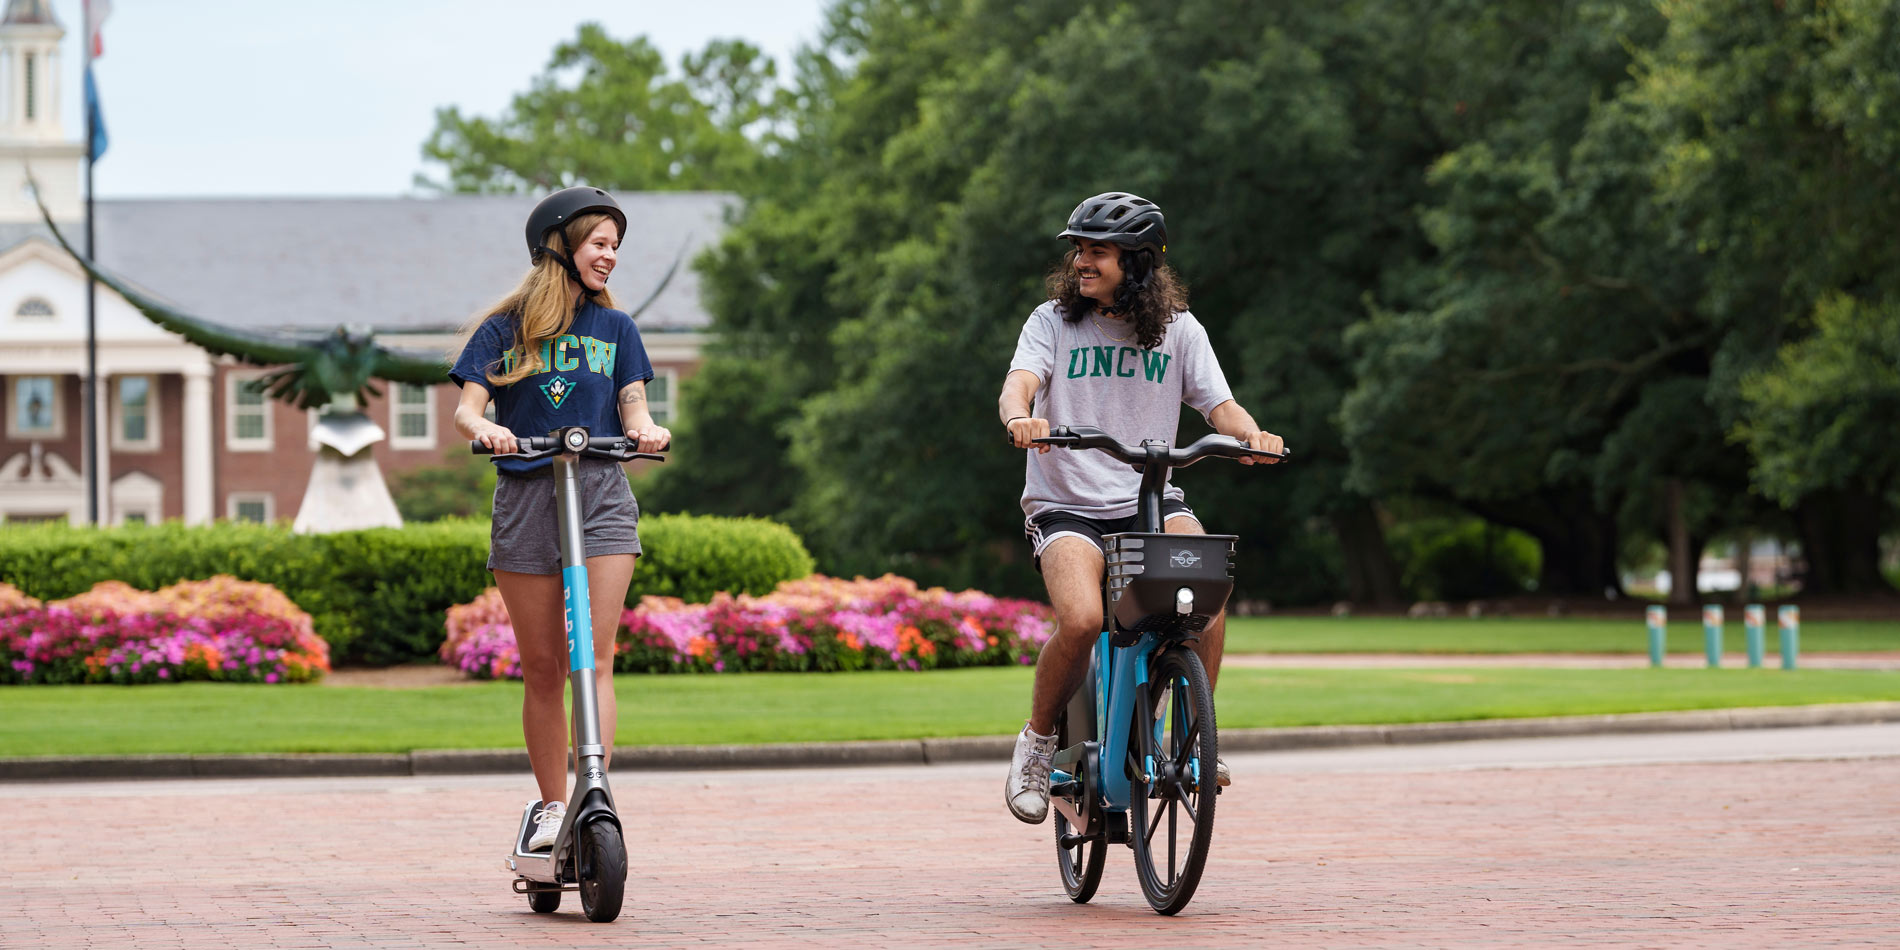 Two students in UNCW T-shirts ride e-bikes on campus.